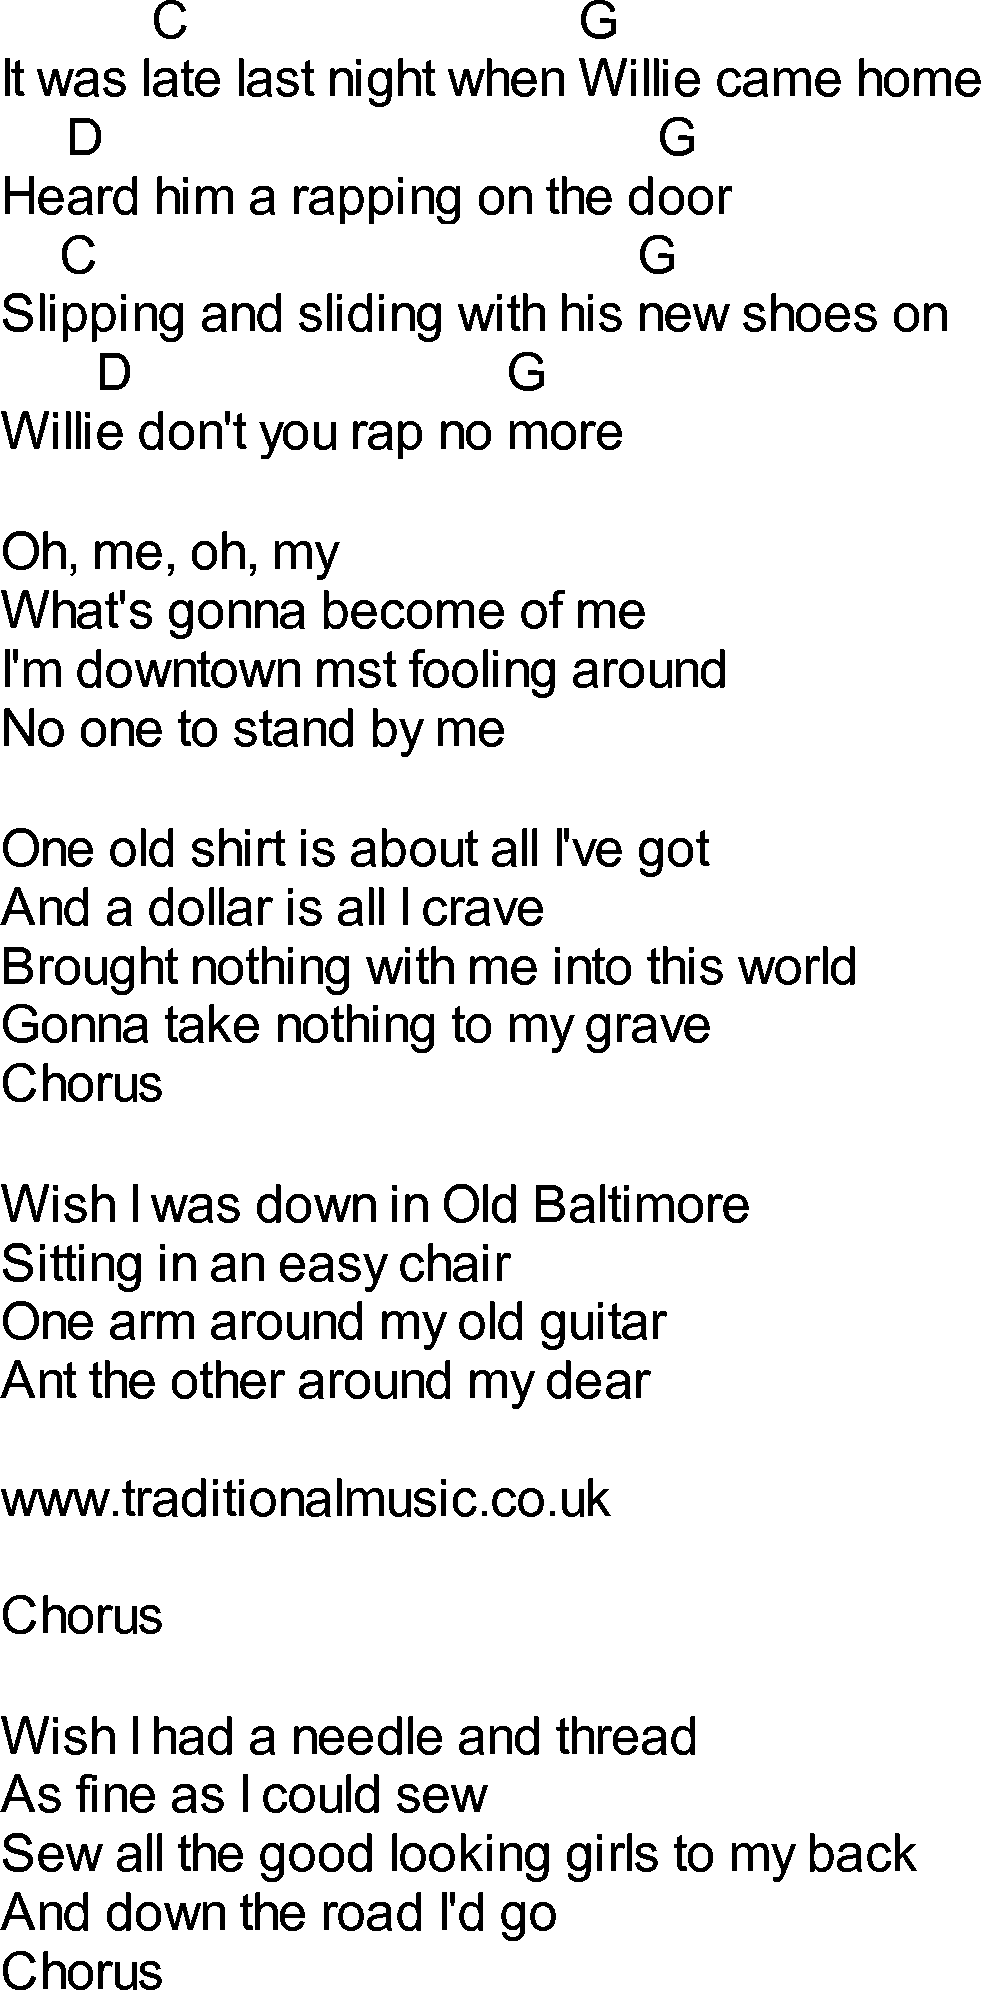 Bluegrass songs with chords - Way Downtown